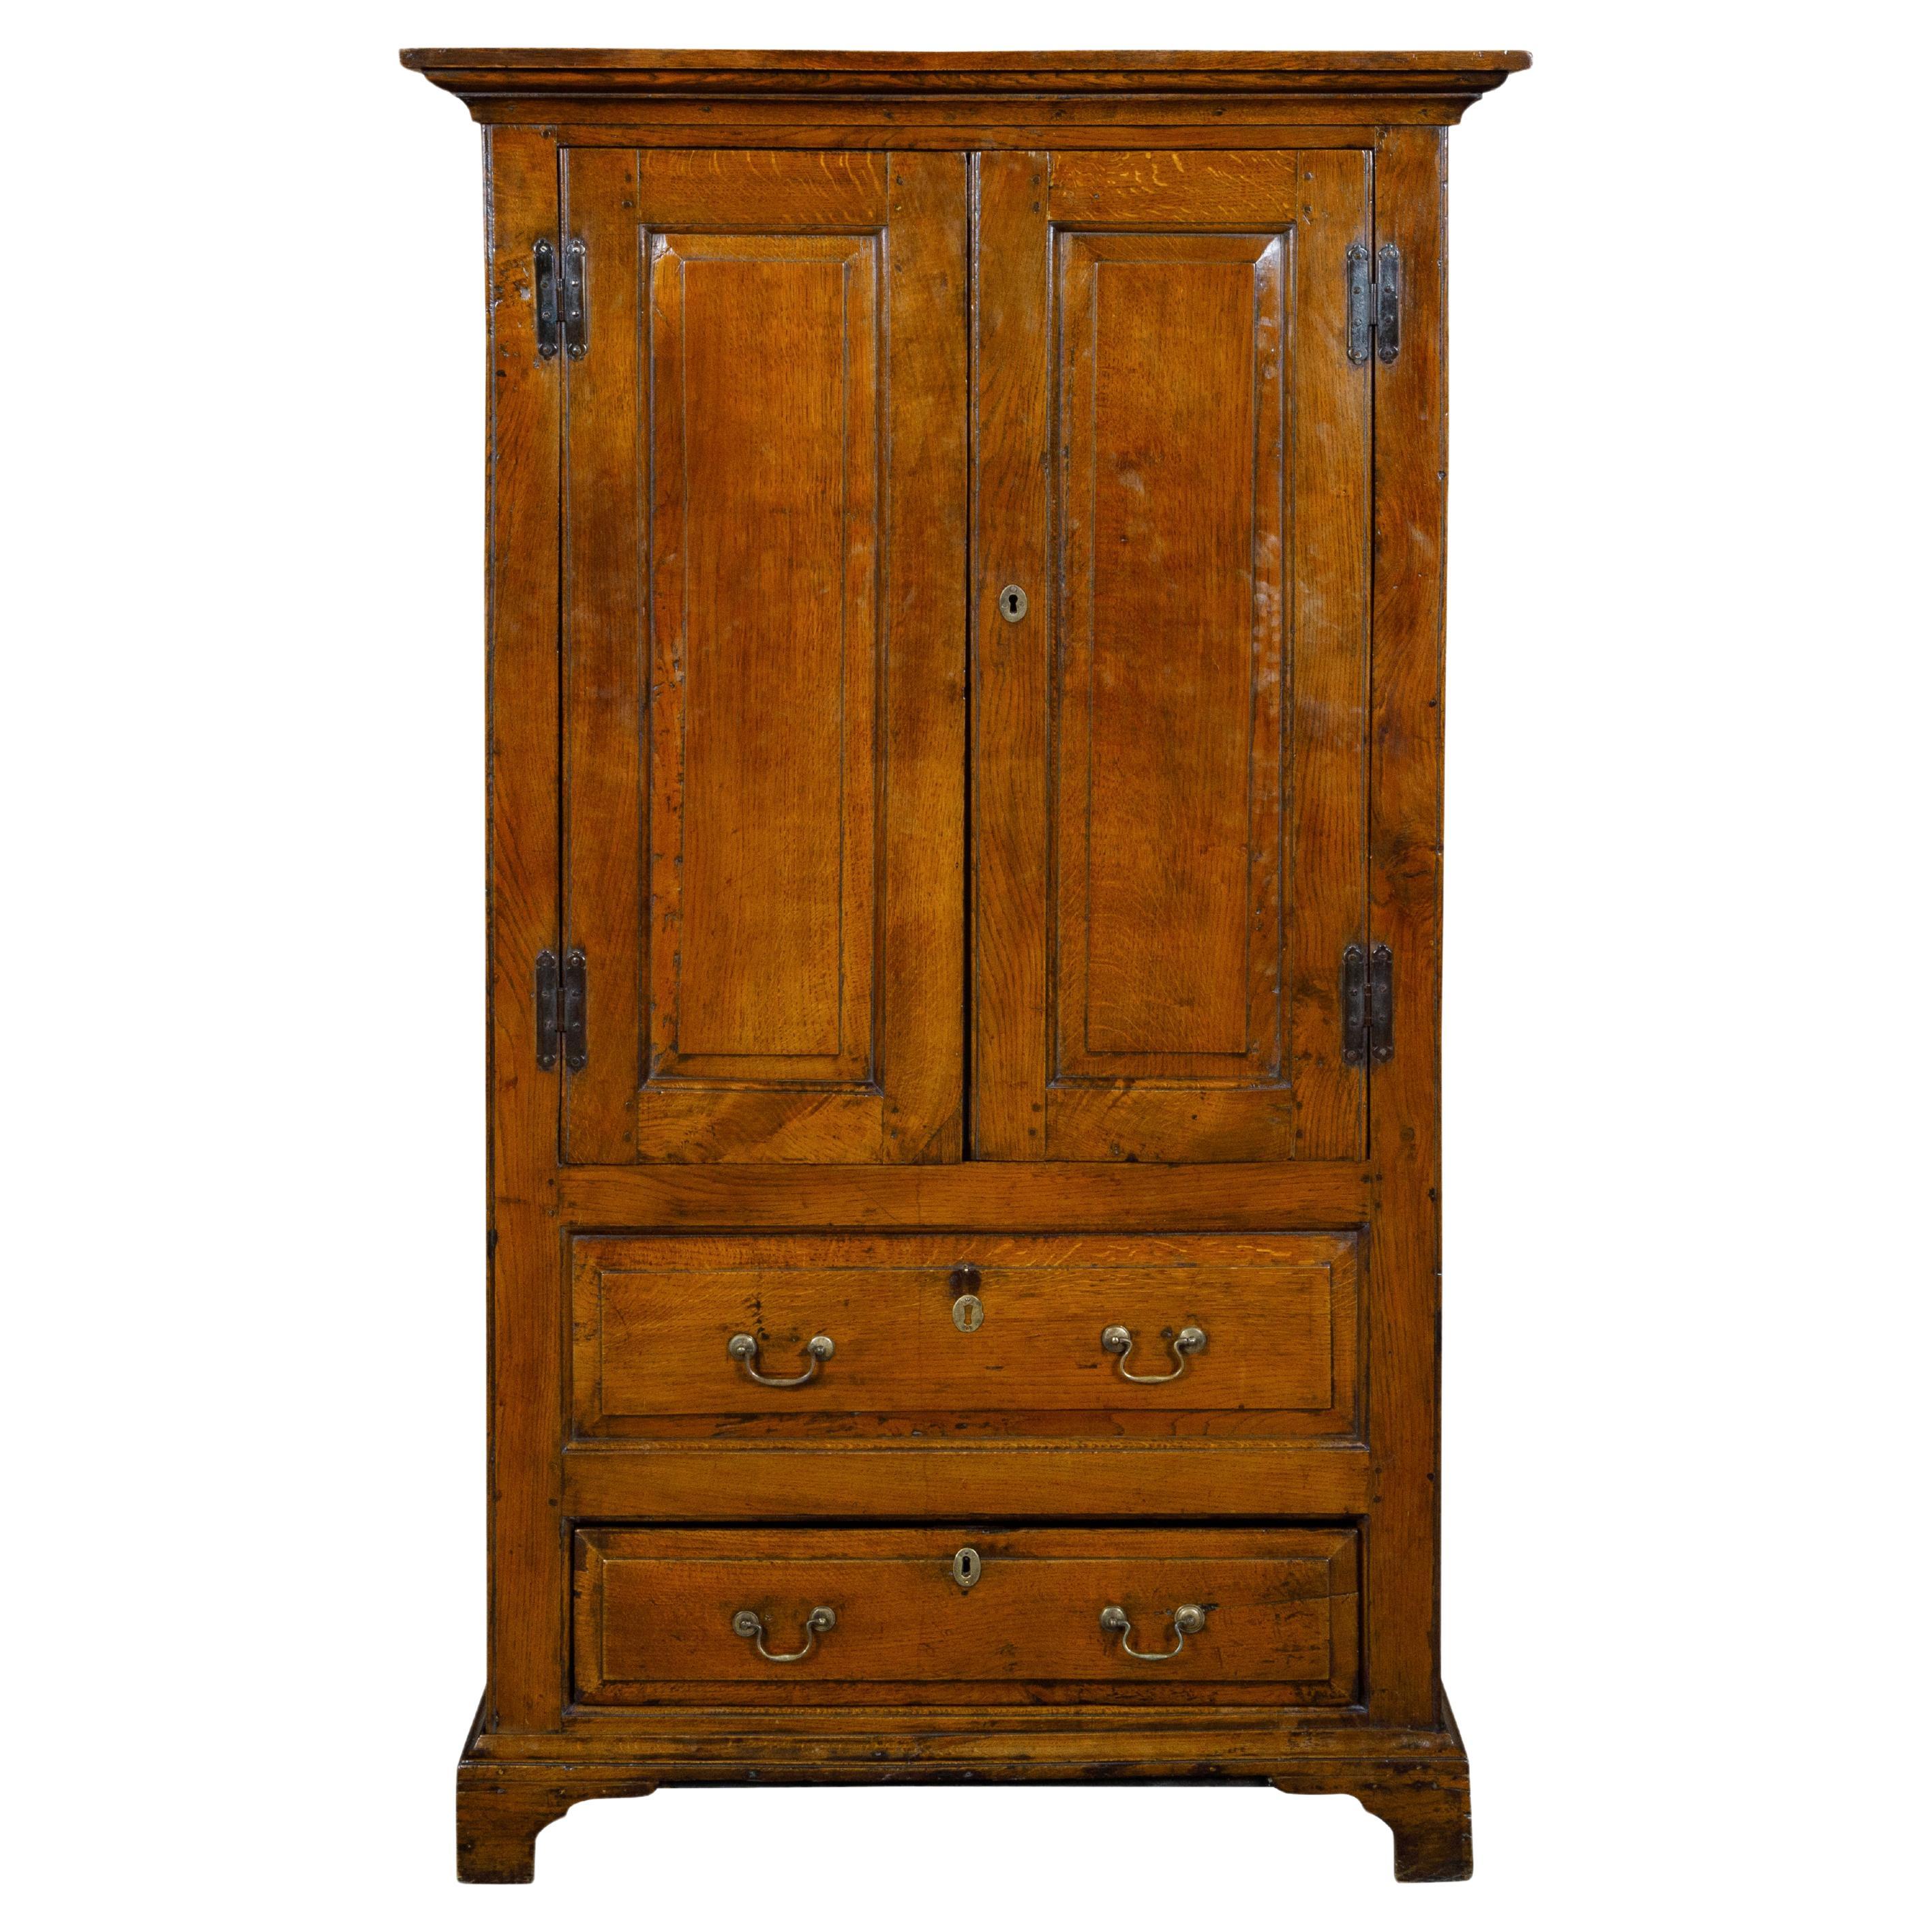 19th Century English Oak Armoire with Carved Doors, Bracket Feet, Brass Hardware